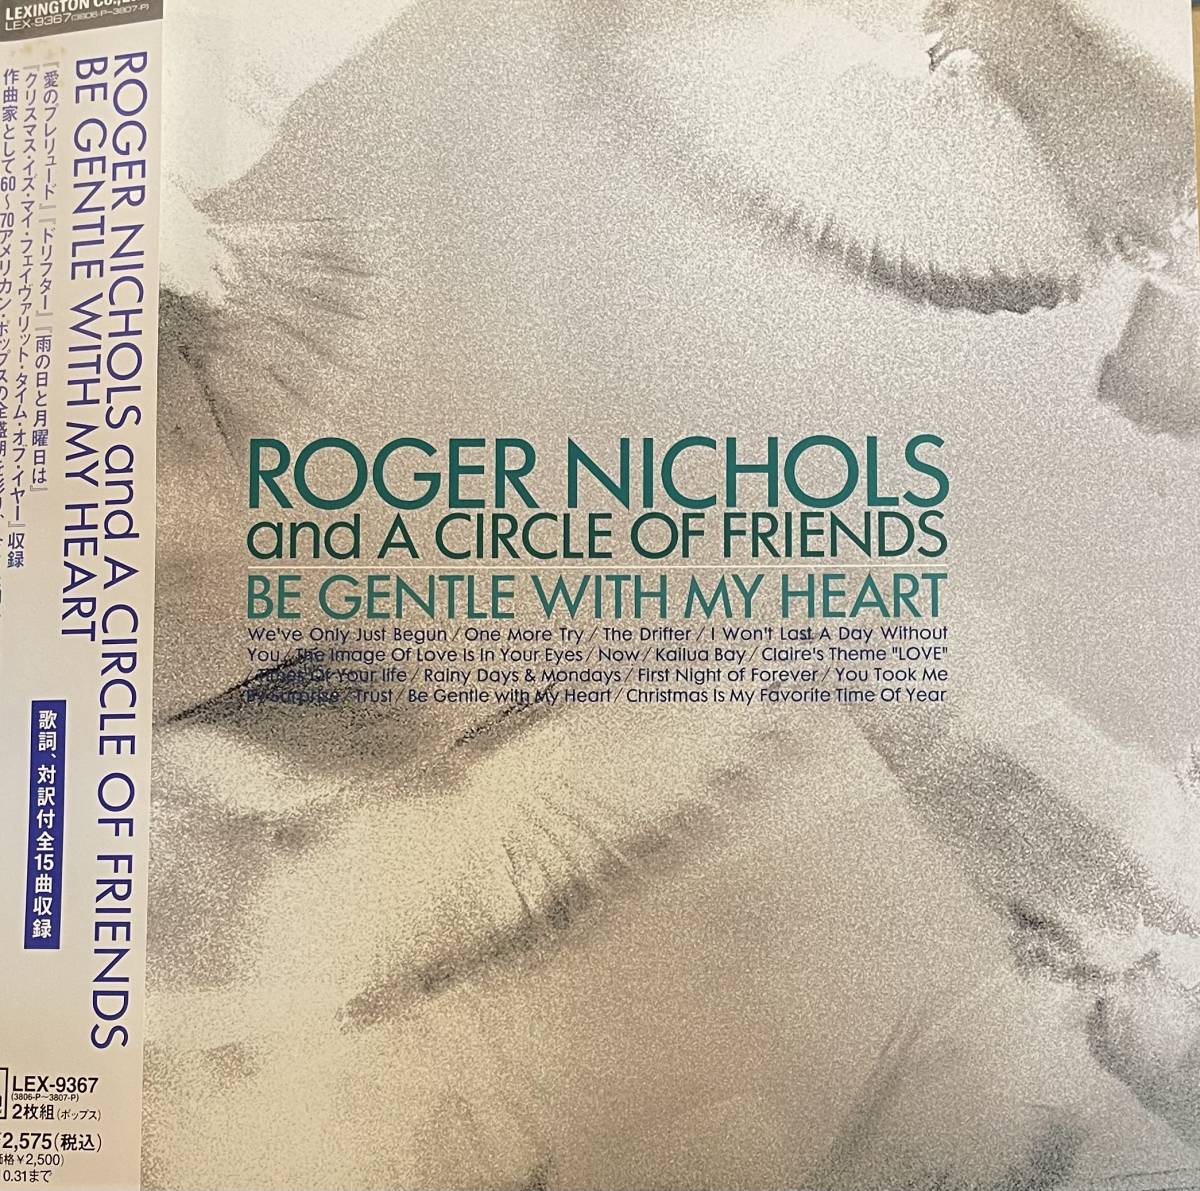 LP 2枚組　ロジャー・ニコルズ ビー・ジェントル・ウィズ・マイ・ハート　Roger Nichols And A Small Circle Of Friends ソフトロック_画像1